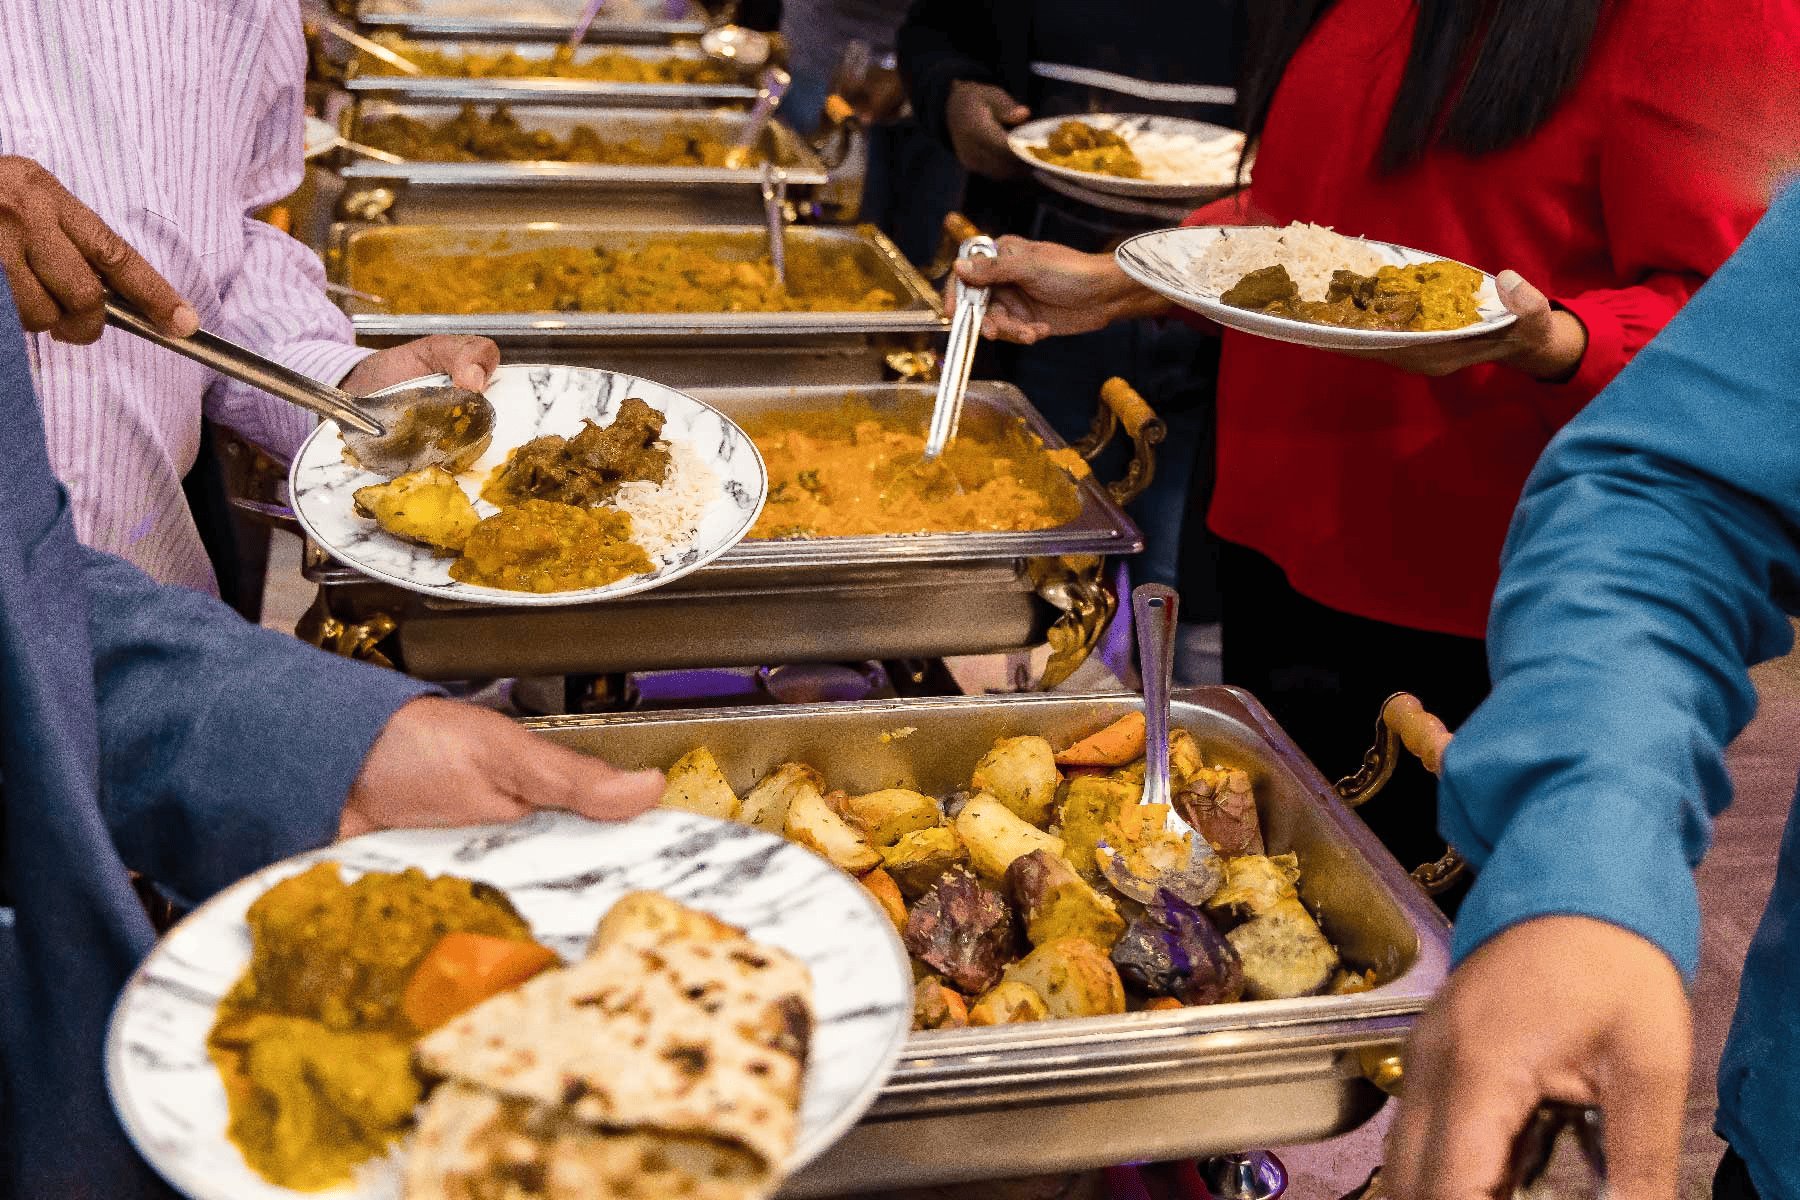 Raj's Corner Catering Services providing all your catering needs with traditional Indian cuisine and tandoori dishes